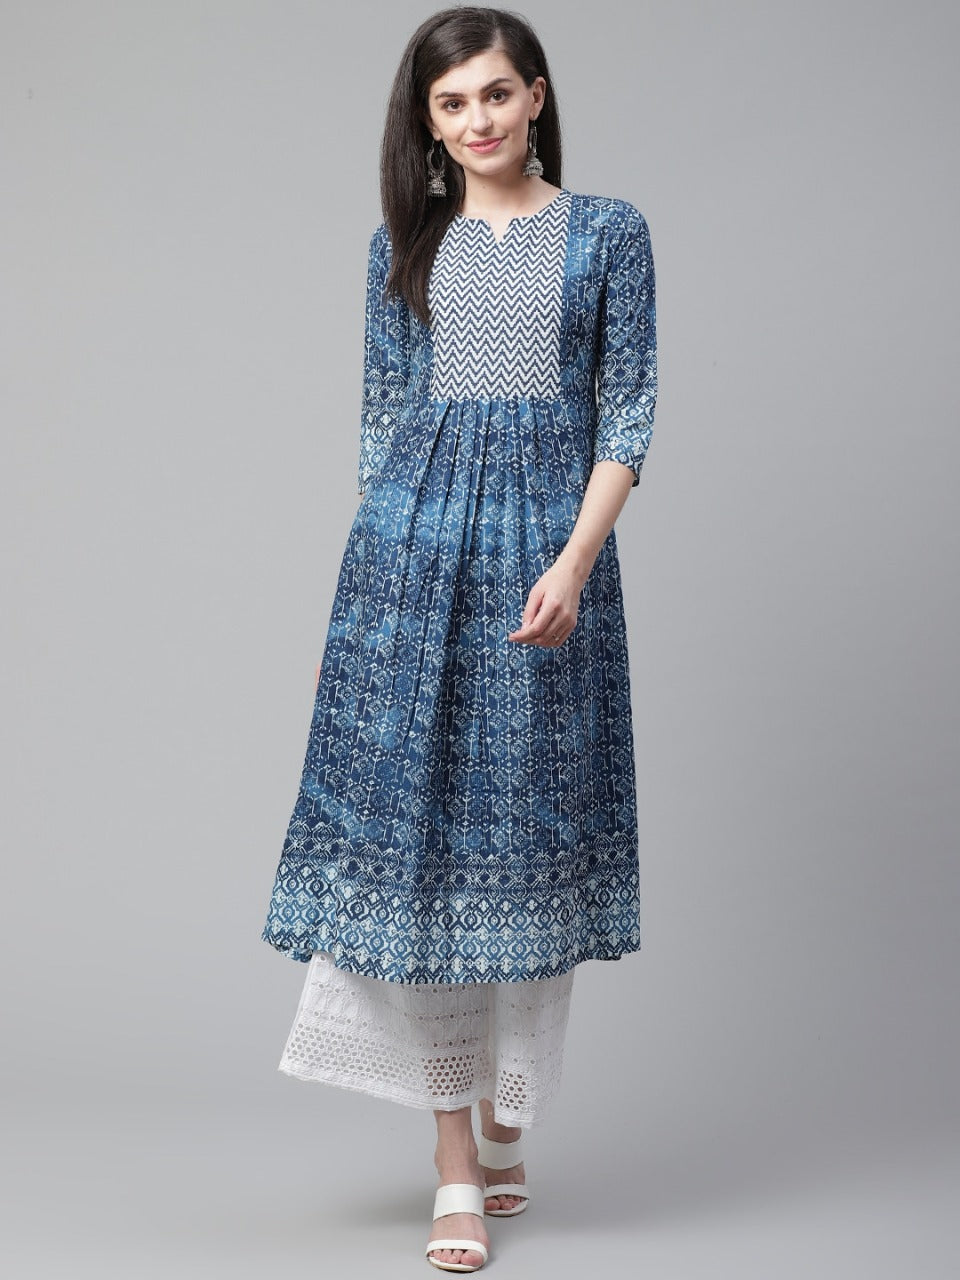 Women's Blue Cotton Printed Party Wear/Casual Wear Only Kurti - Vamika